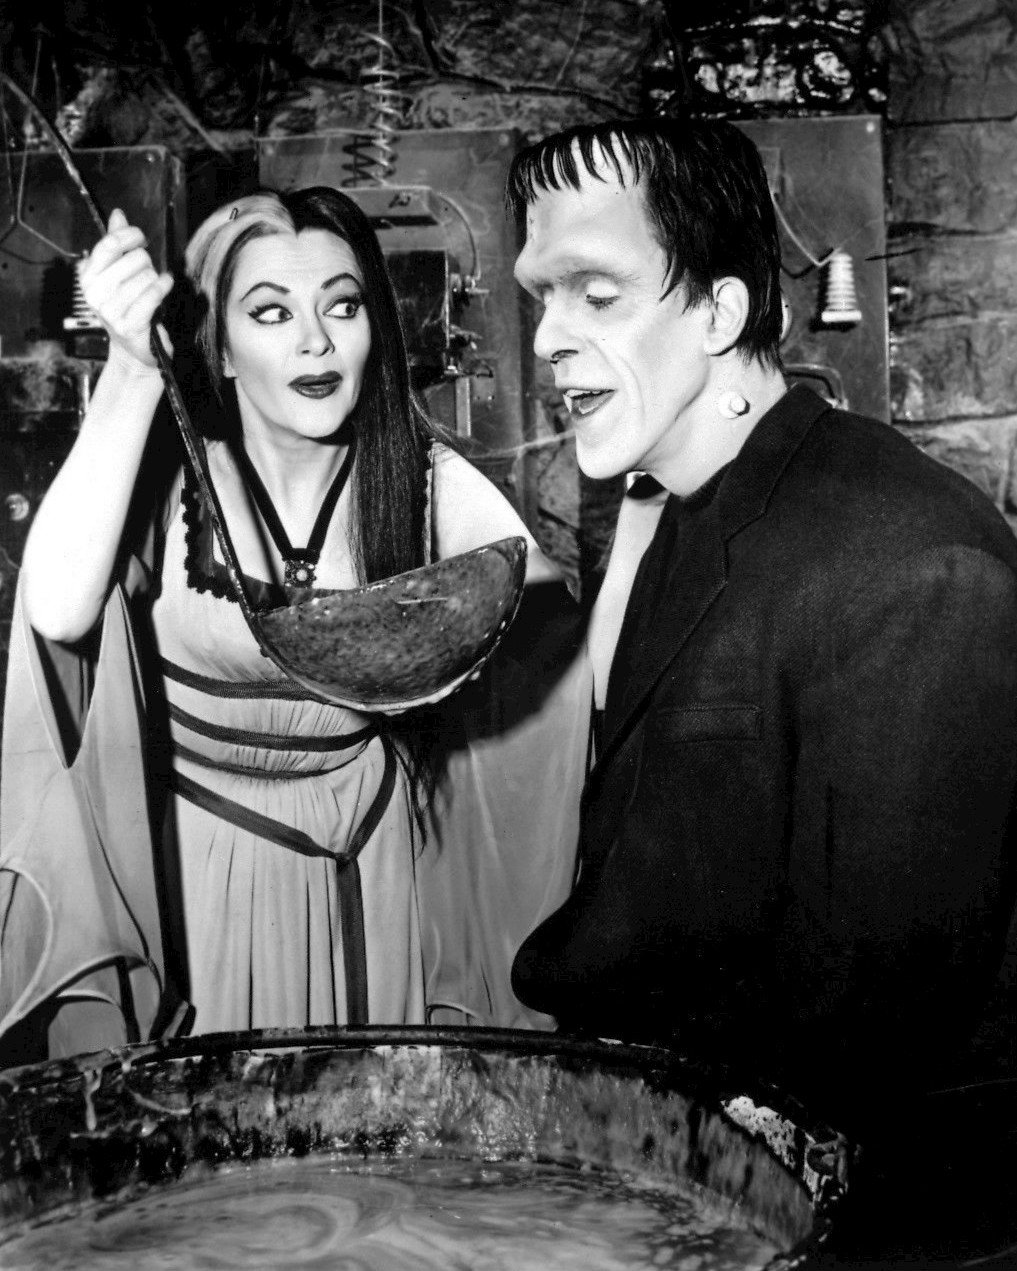 IN 'THE MUNSTERS' (BB-996) Fred Gwynne (as Herman Munster) and Yv...